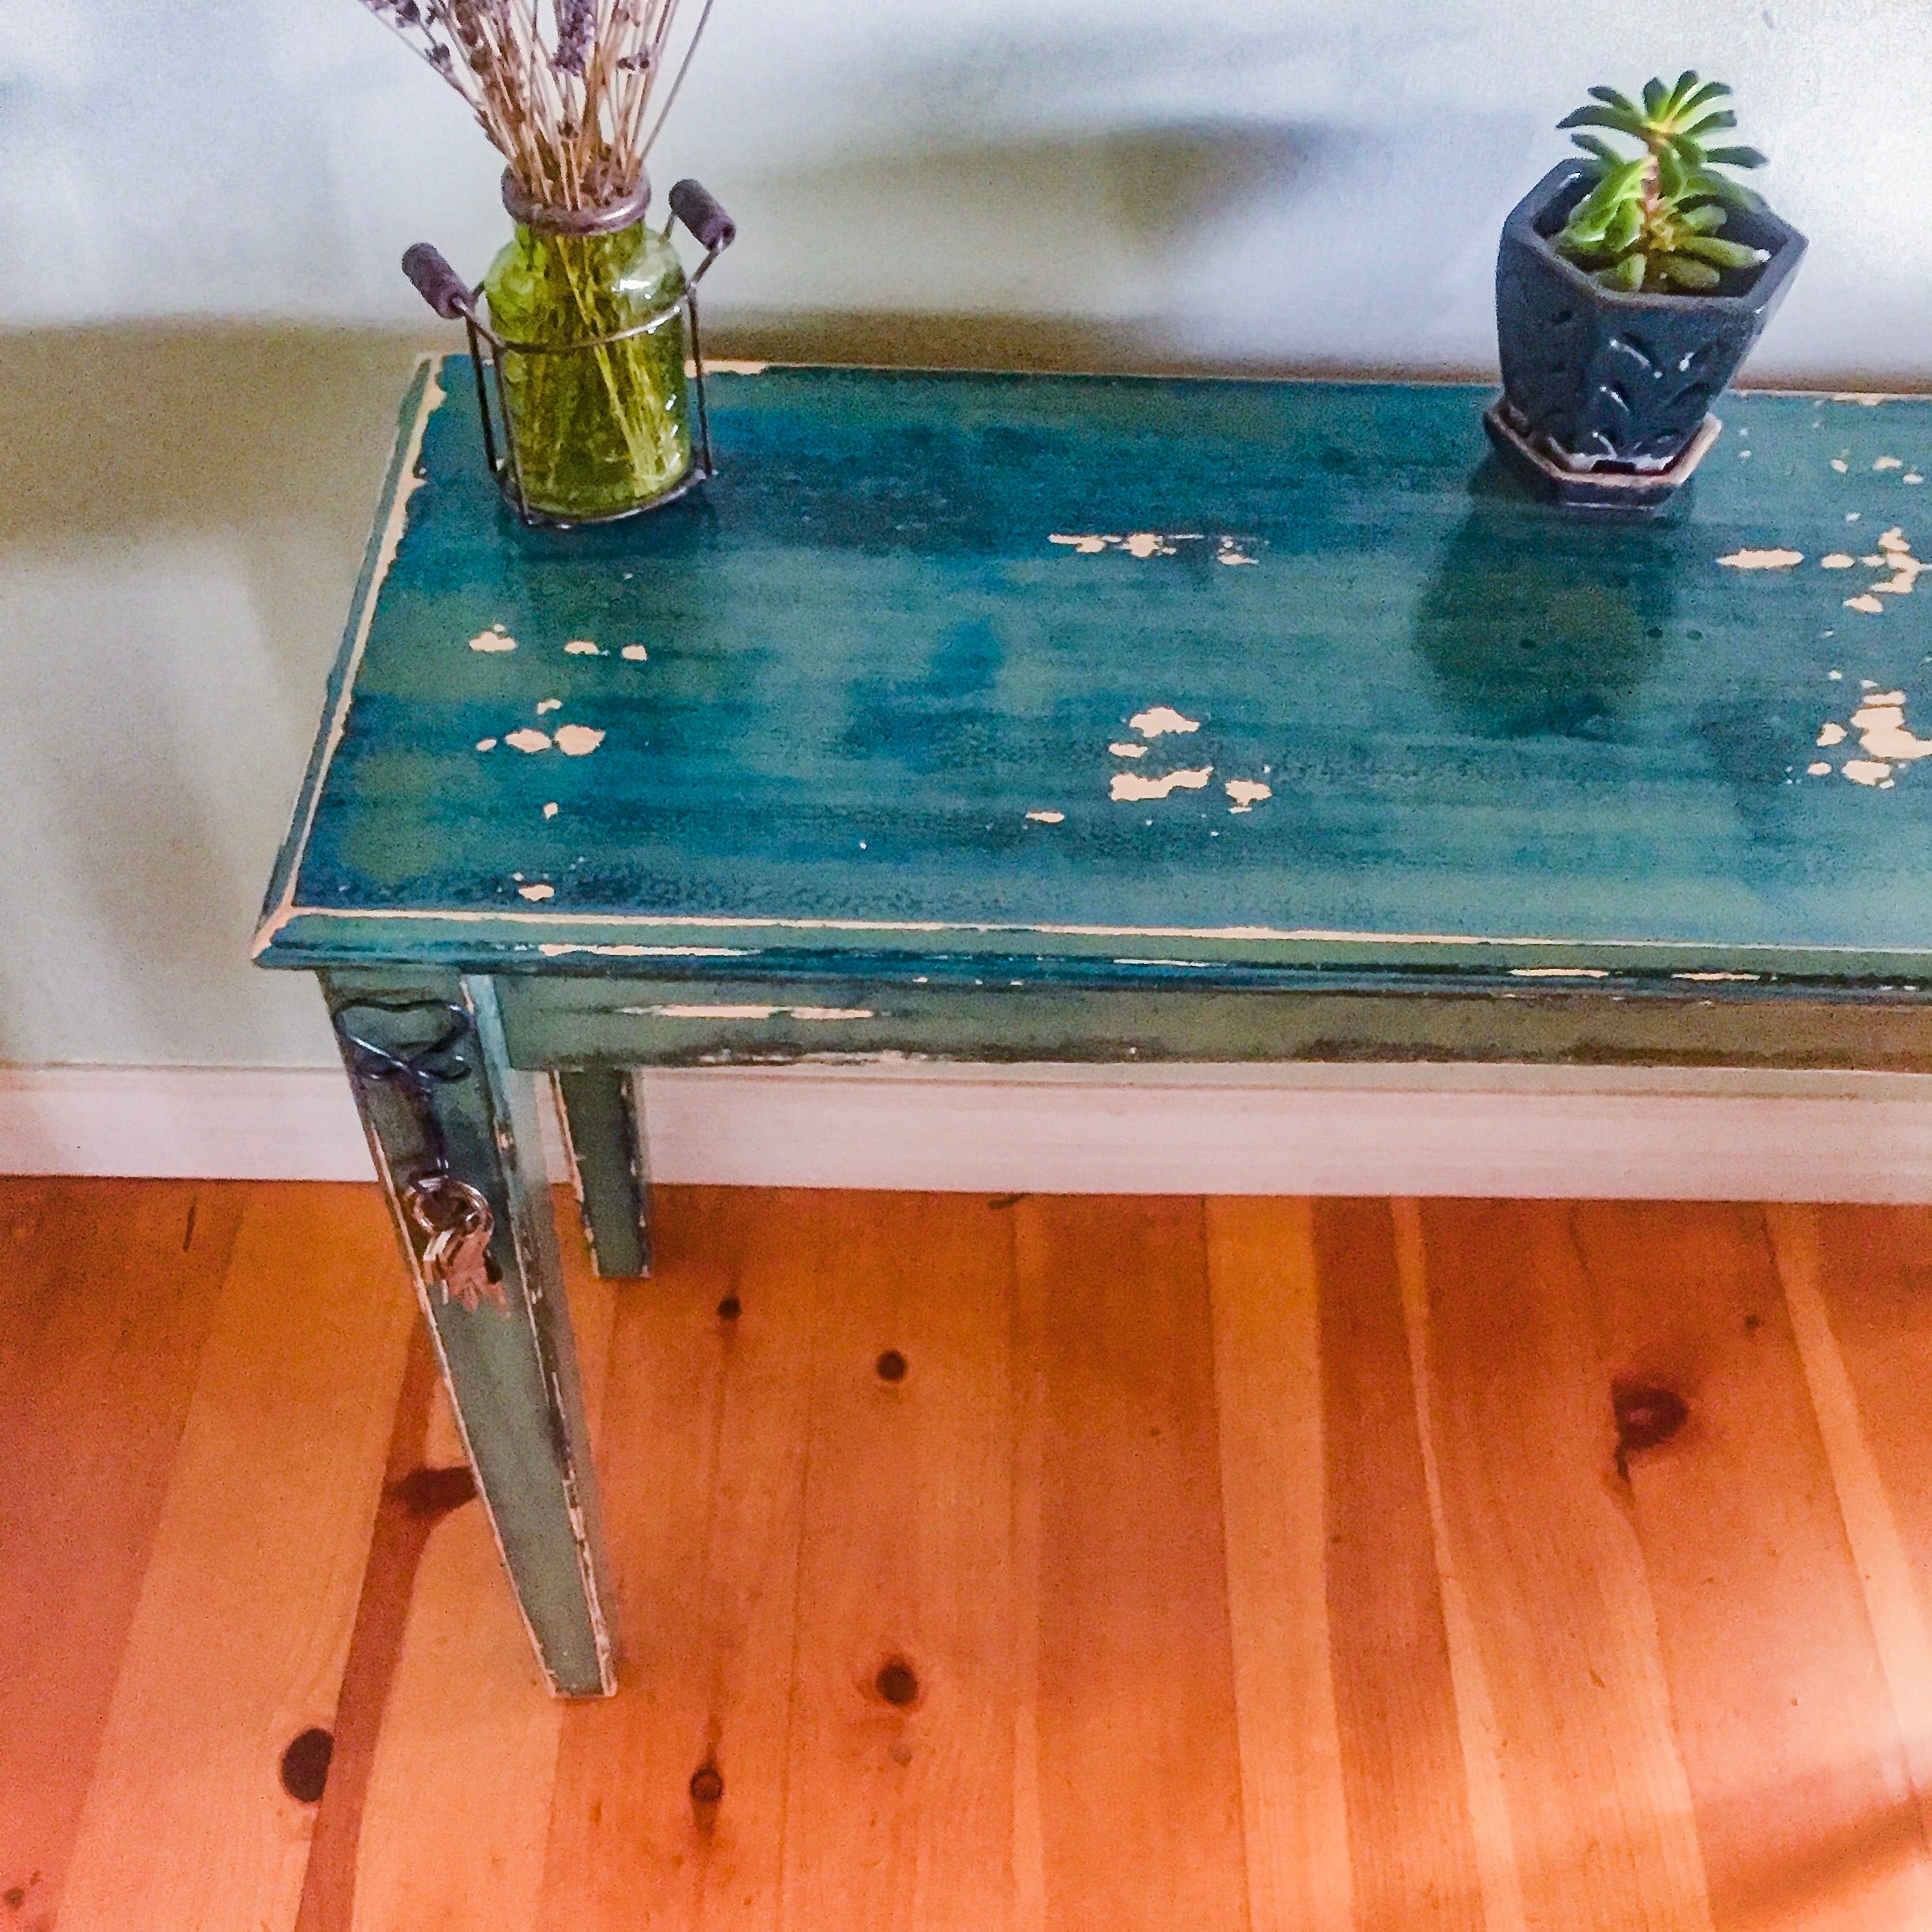 A small, entryway table with heart shaped, key hooks. The table is painted in distressed blue & green hues over solid wood.